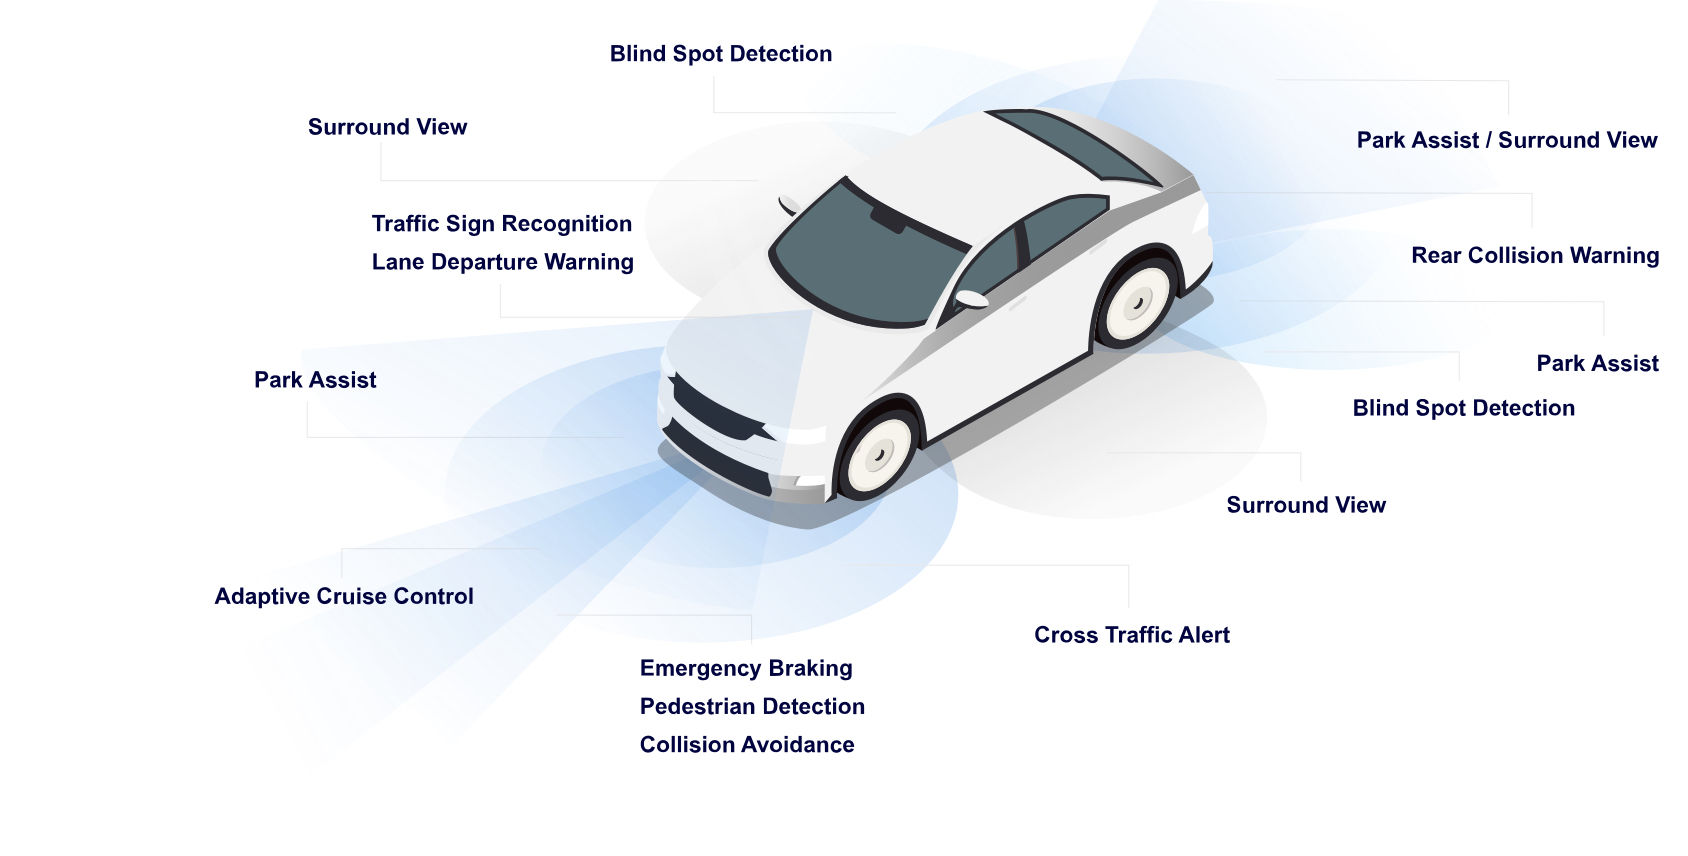 Sensor fusion integrates overlapping information from multiple types of sensors for greater accuracy and effectiveness